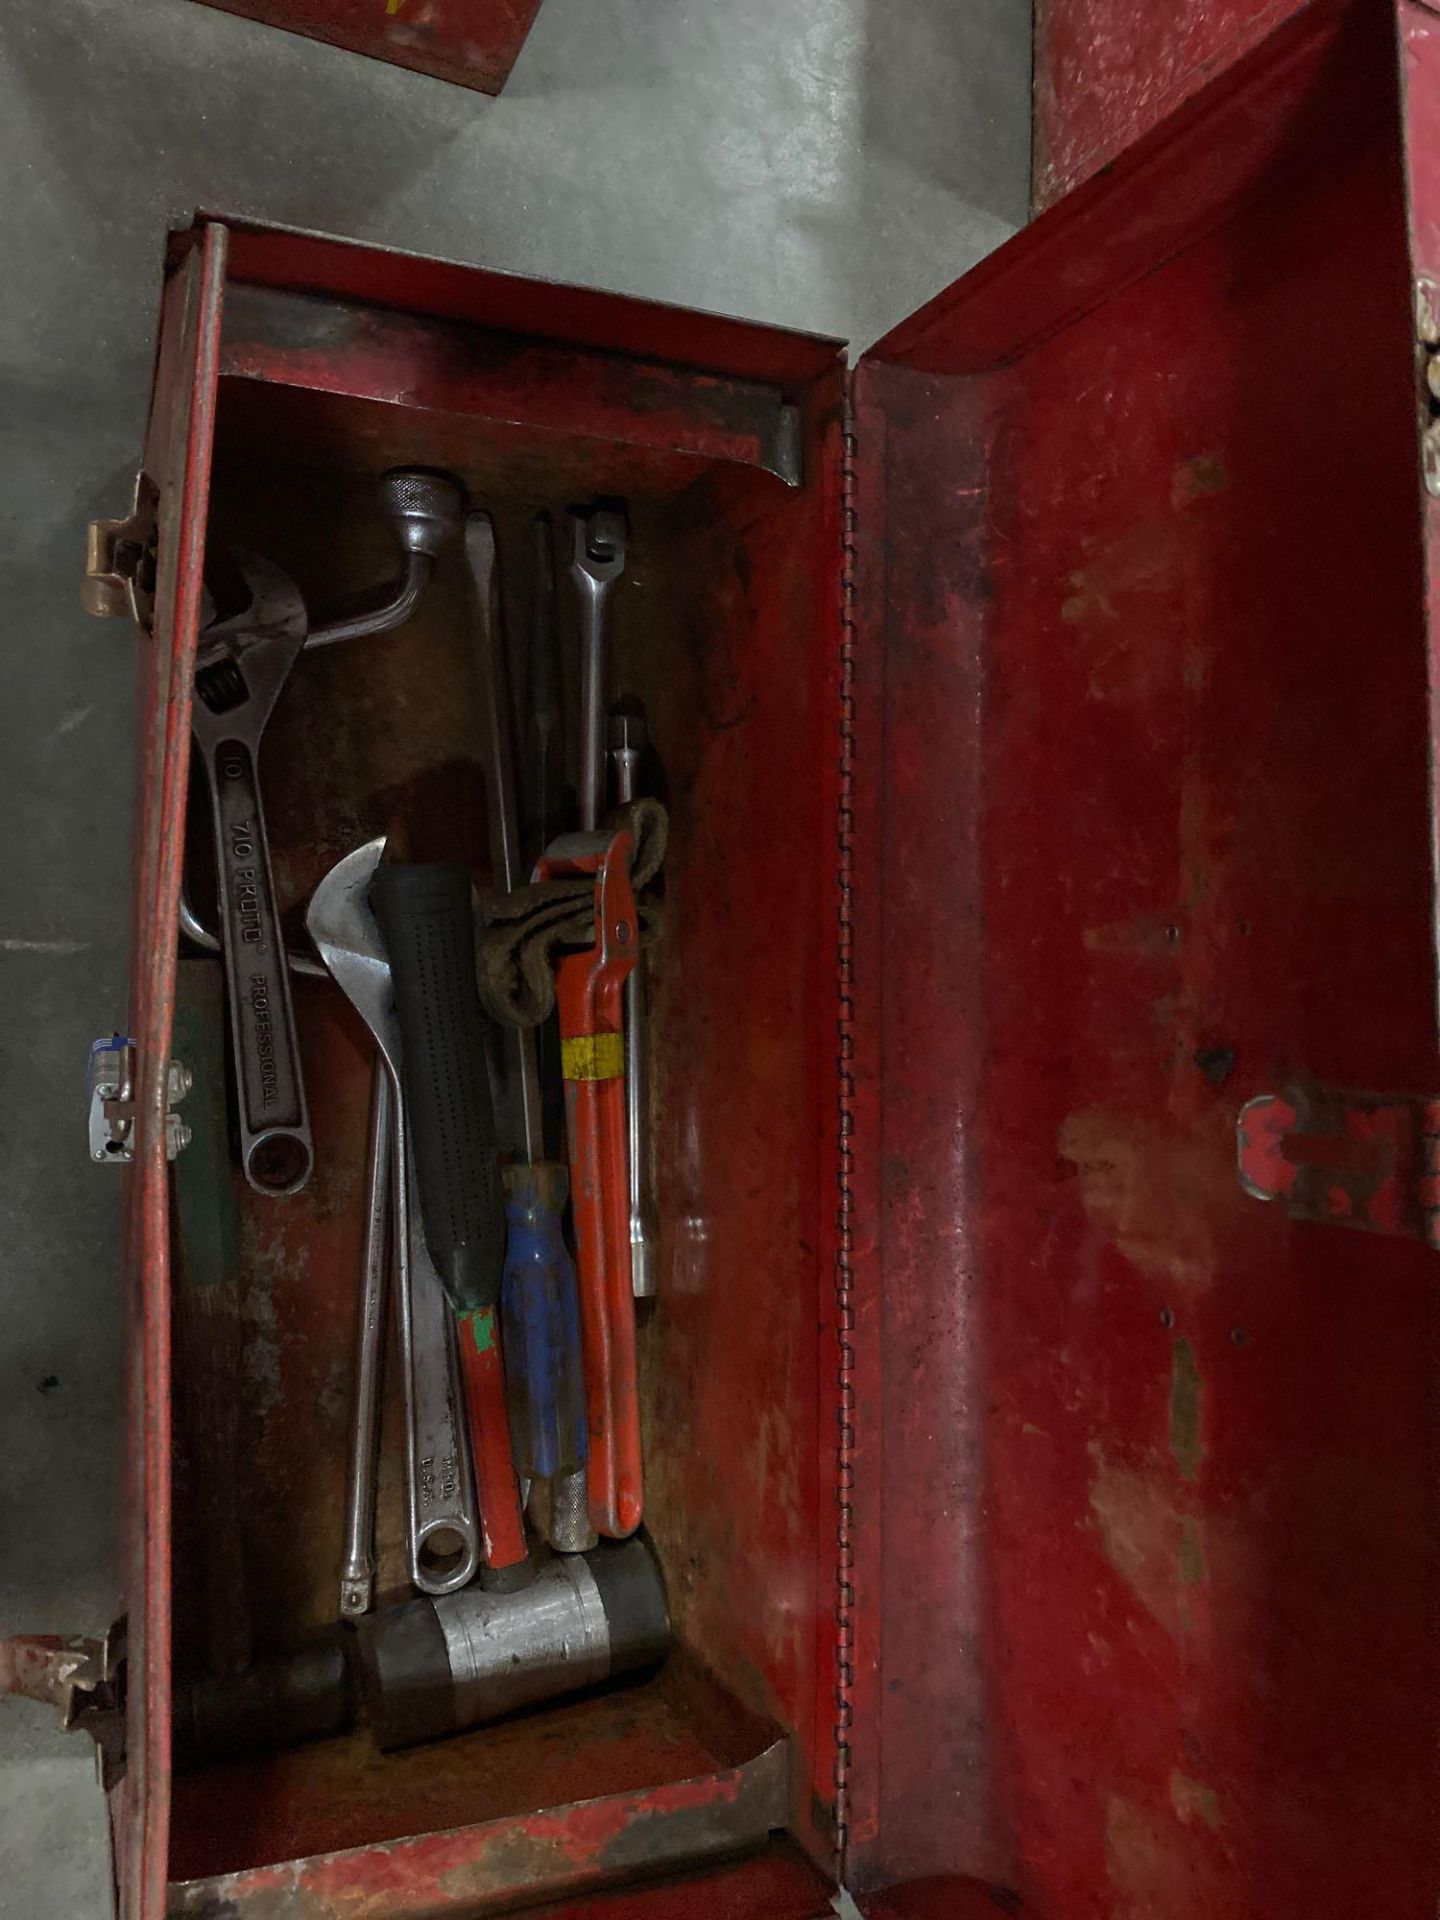 4 PROTO STYLE TOOL BOXES FULL OF PROTO COMBINATION WRENCHES, HAMMERS, PLIERS AND MORE TOOLS - Image 7 of 9